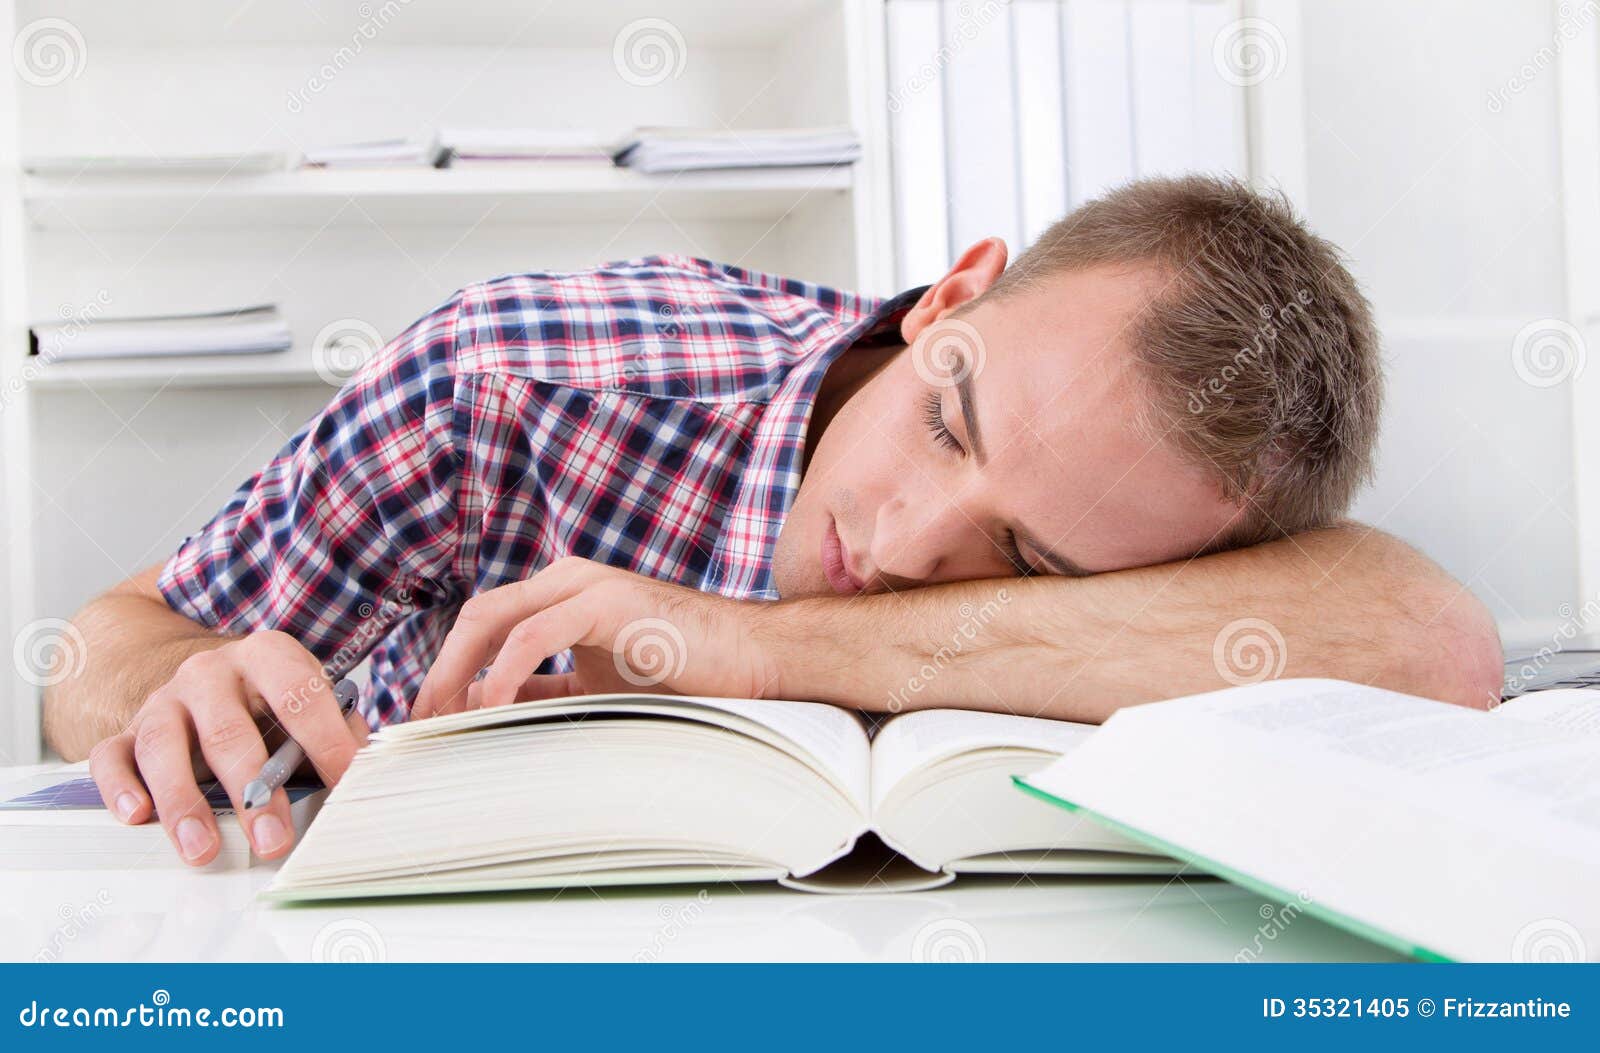 Student Sleeping At Desk Stock Image Image Of Reading 35321405